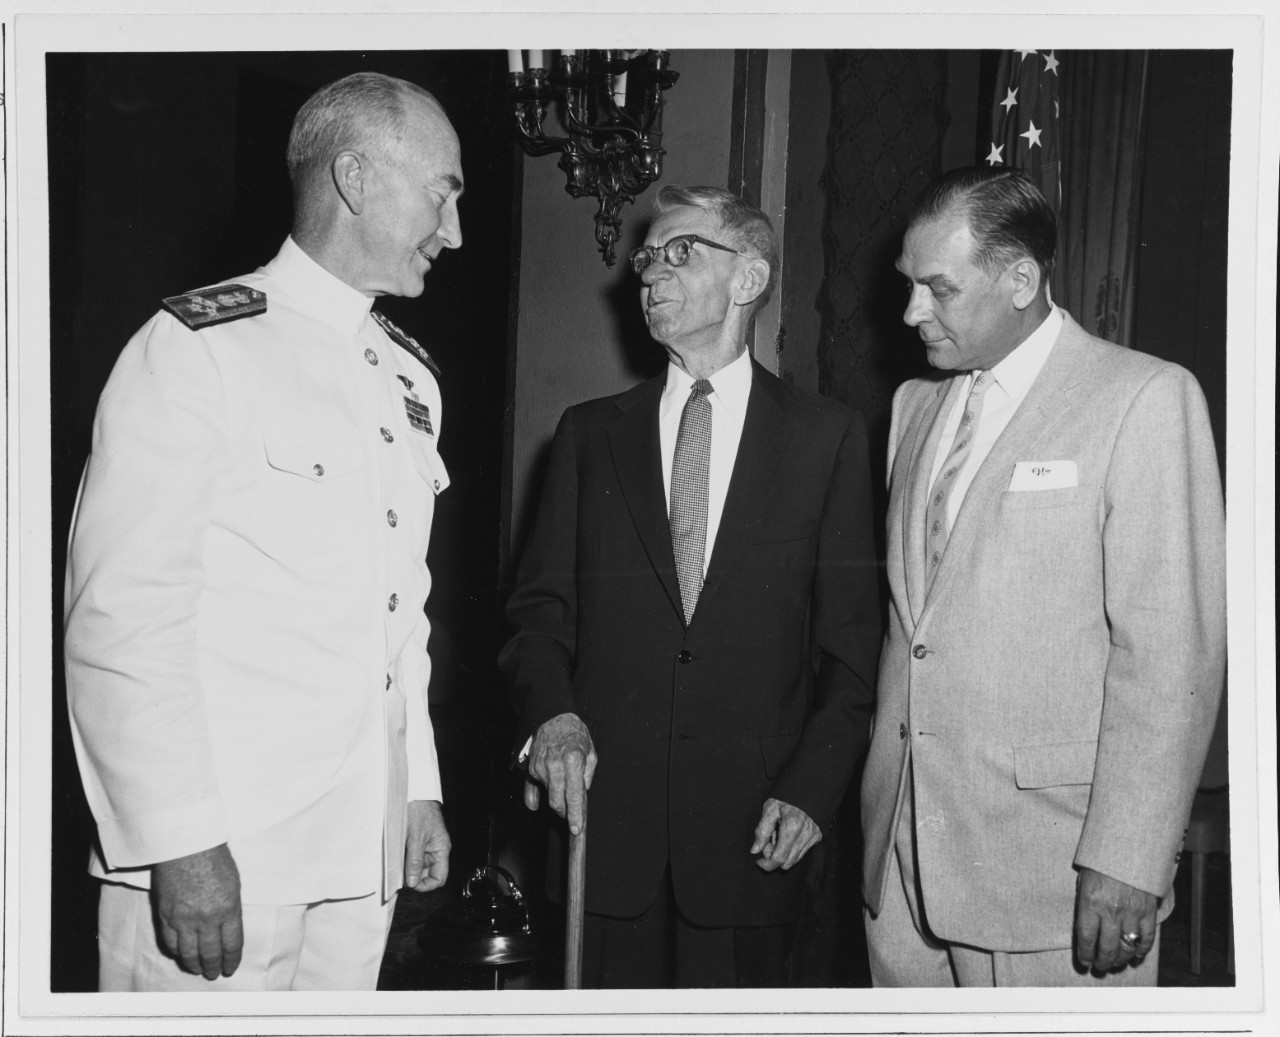 L-R Admiral James Russell, USN, Vcno; Rear Admiral J.A. Furer USN (RET) and Rear Admiral Robert L. Moore, Depchief Buships.